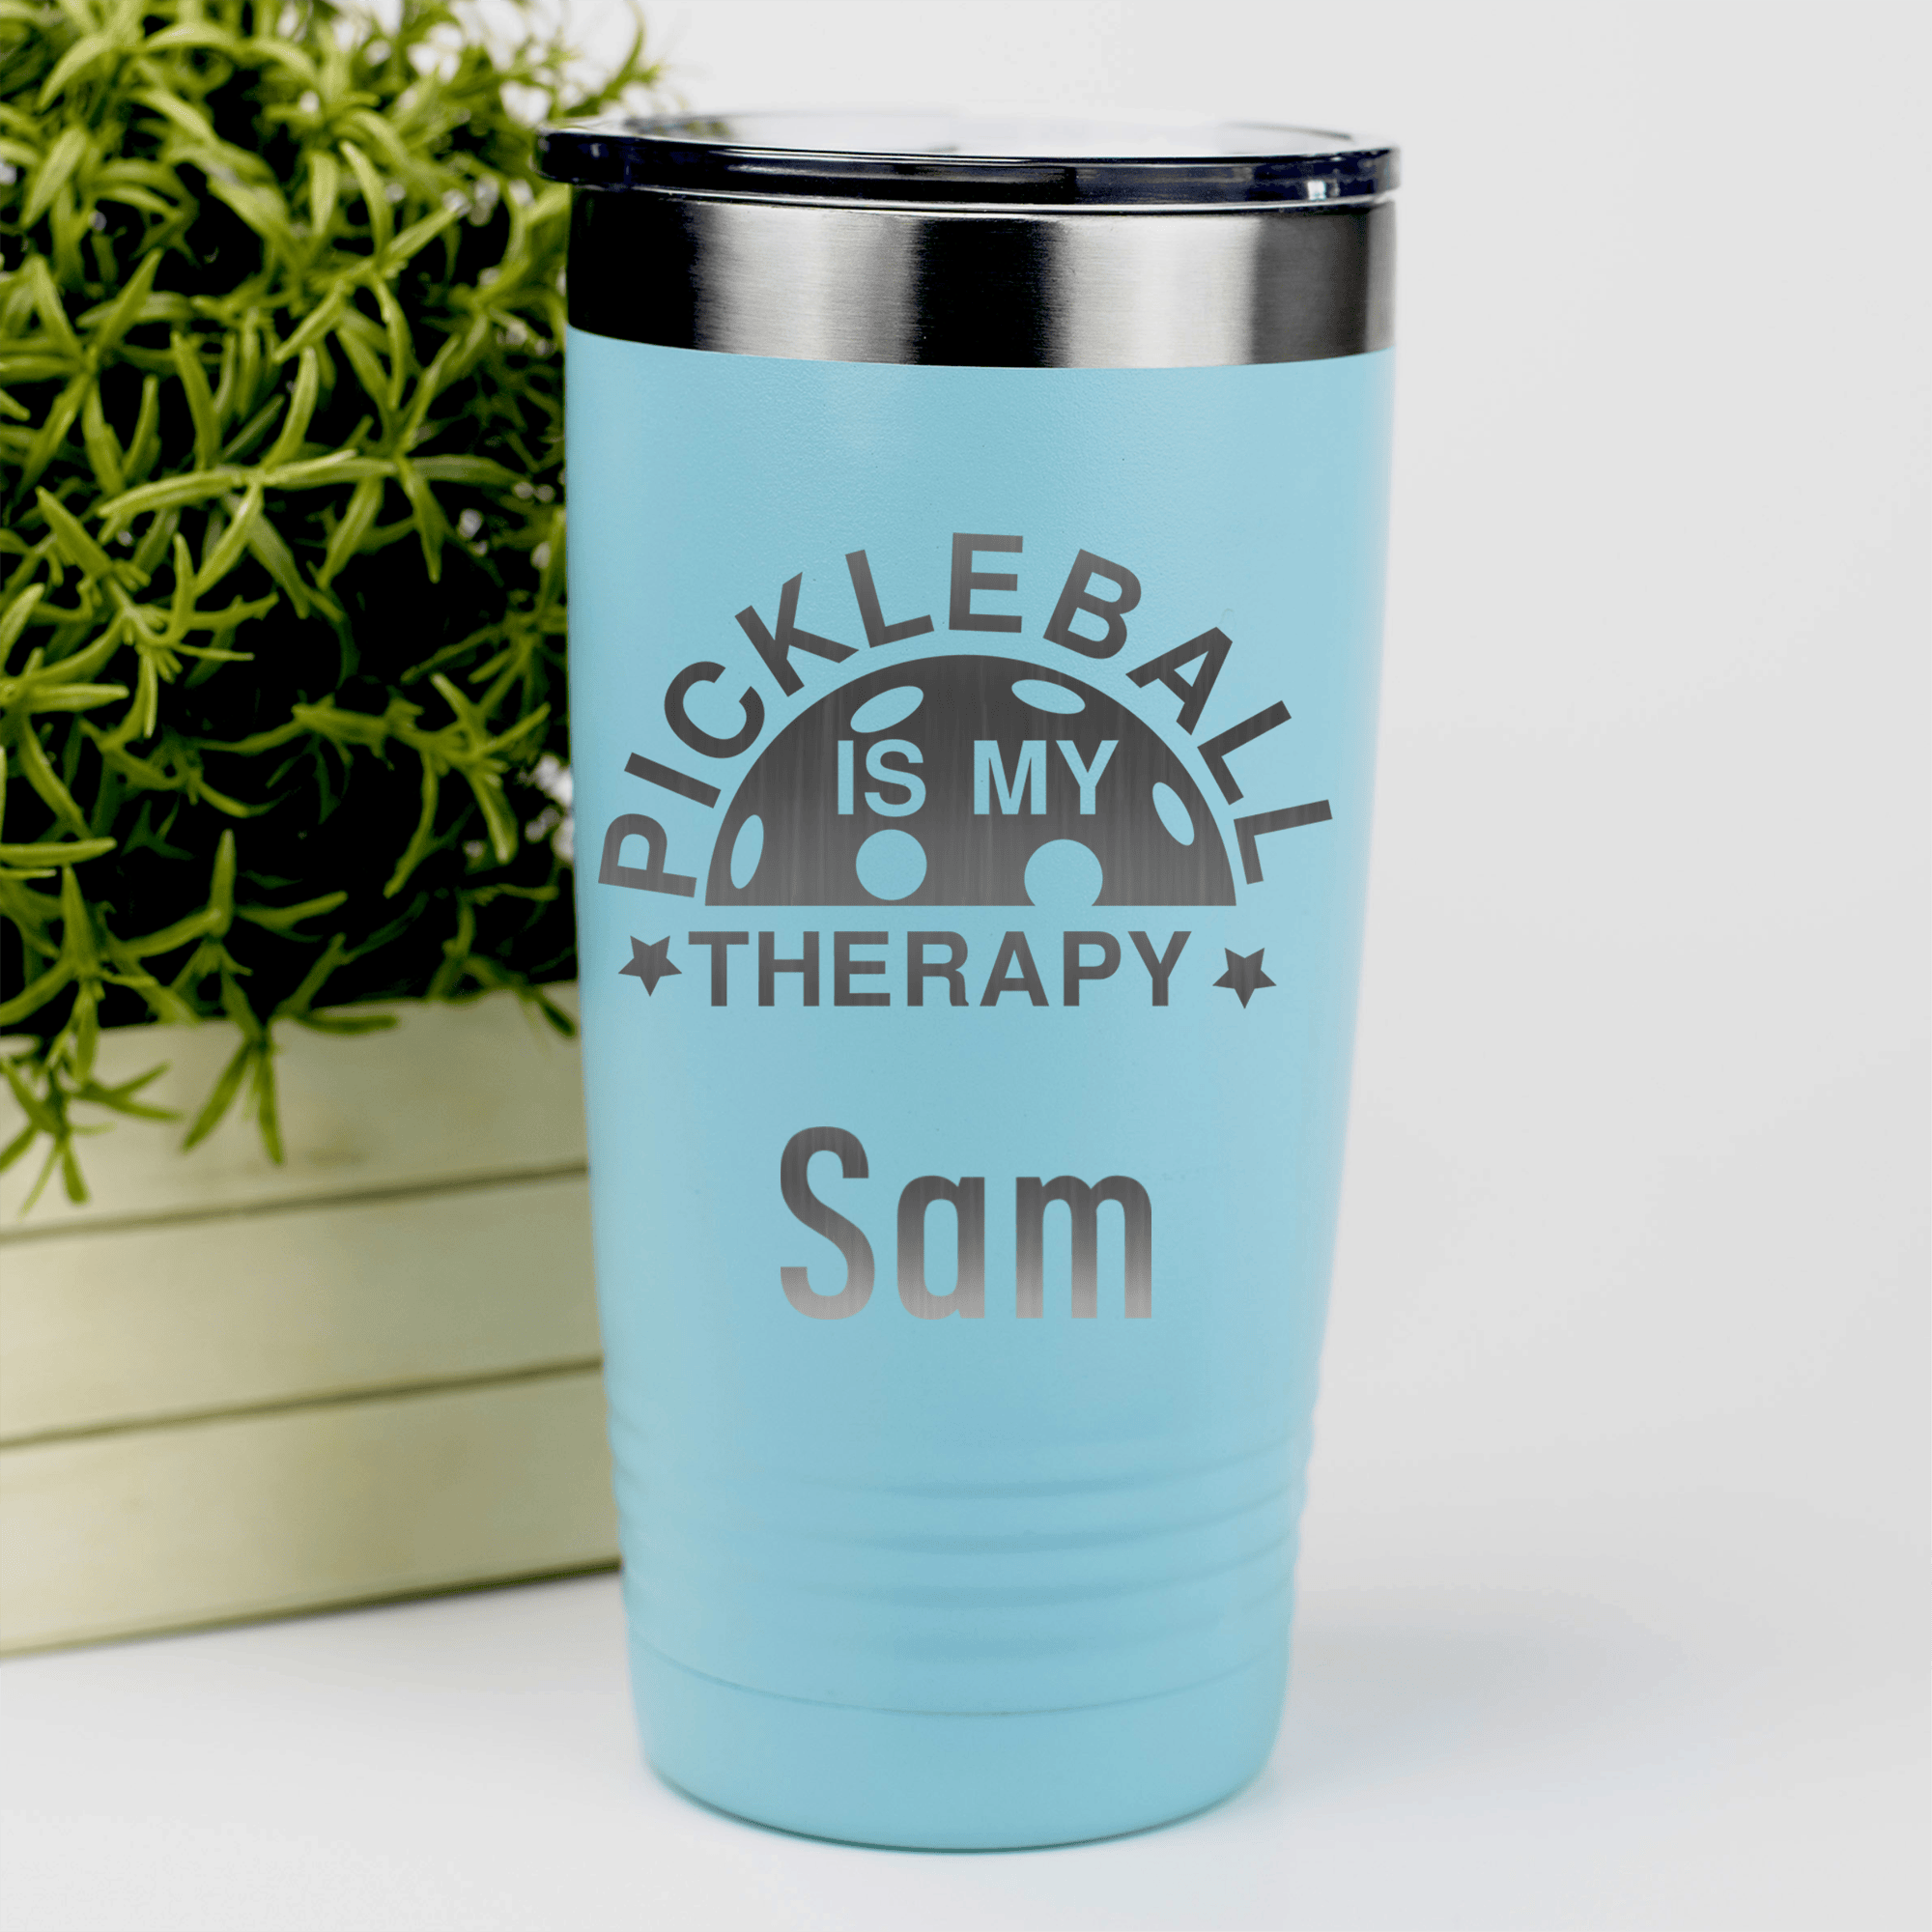 Teal Pickleball Tumbler With Pickleball Therapy Design